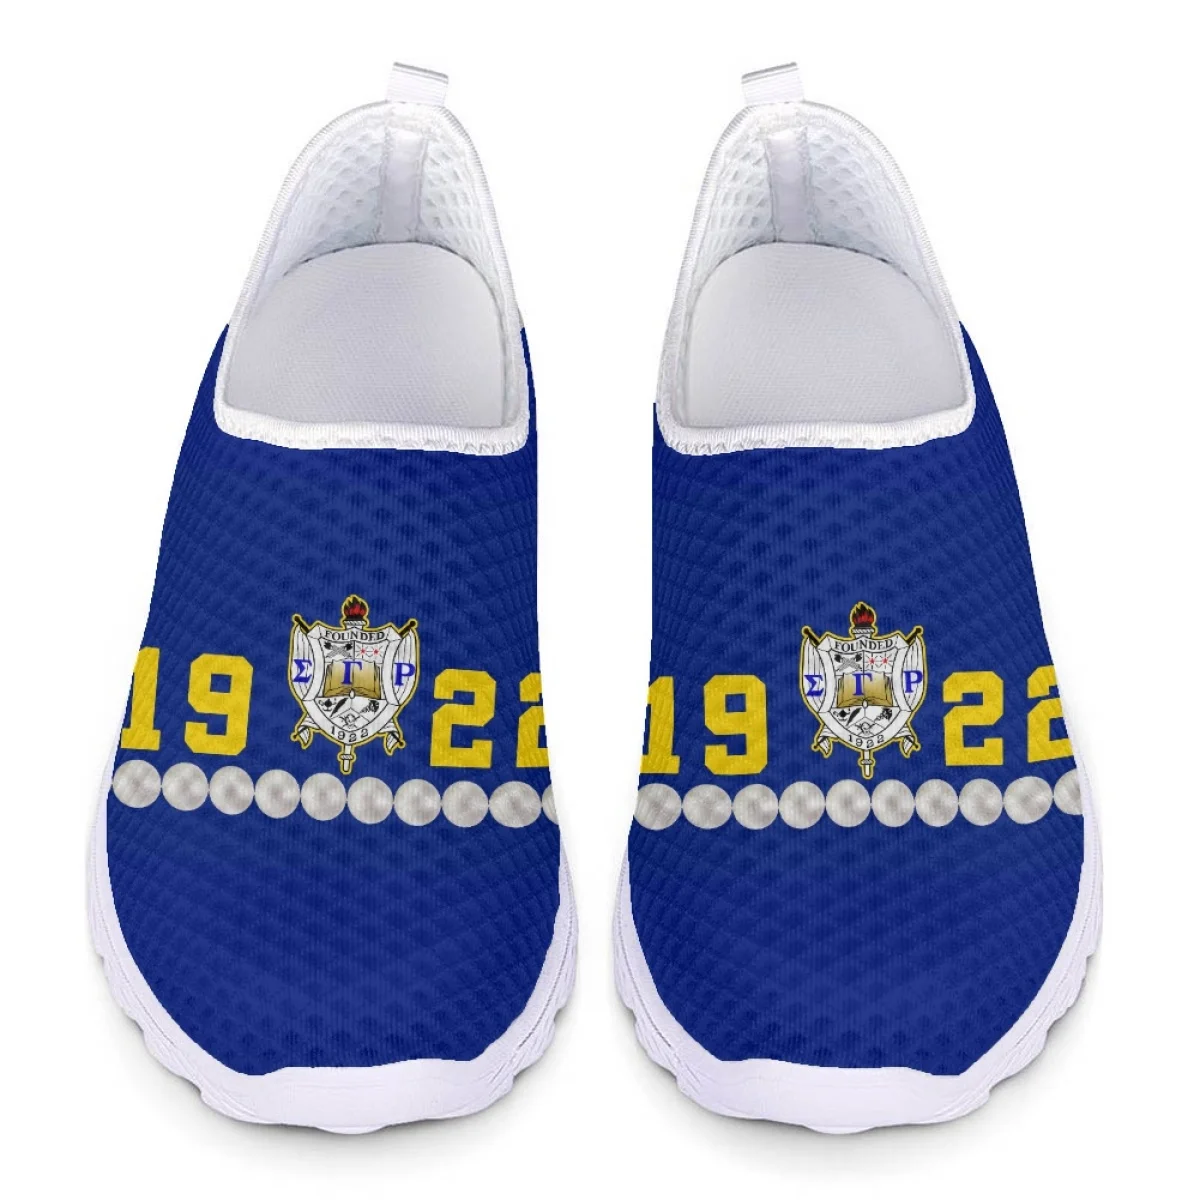 

Nopersonality Centennial Theme Sneakers Women Comfort Casual Shoes Slip On Convenience Sigma Gamma Rho Running Shoes Zapatillas